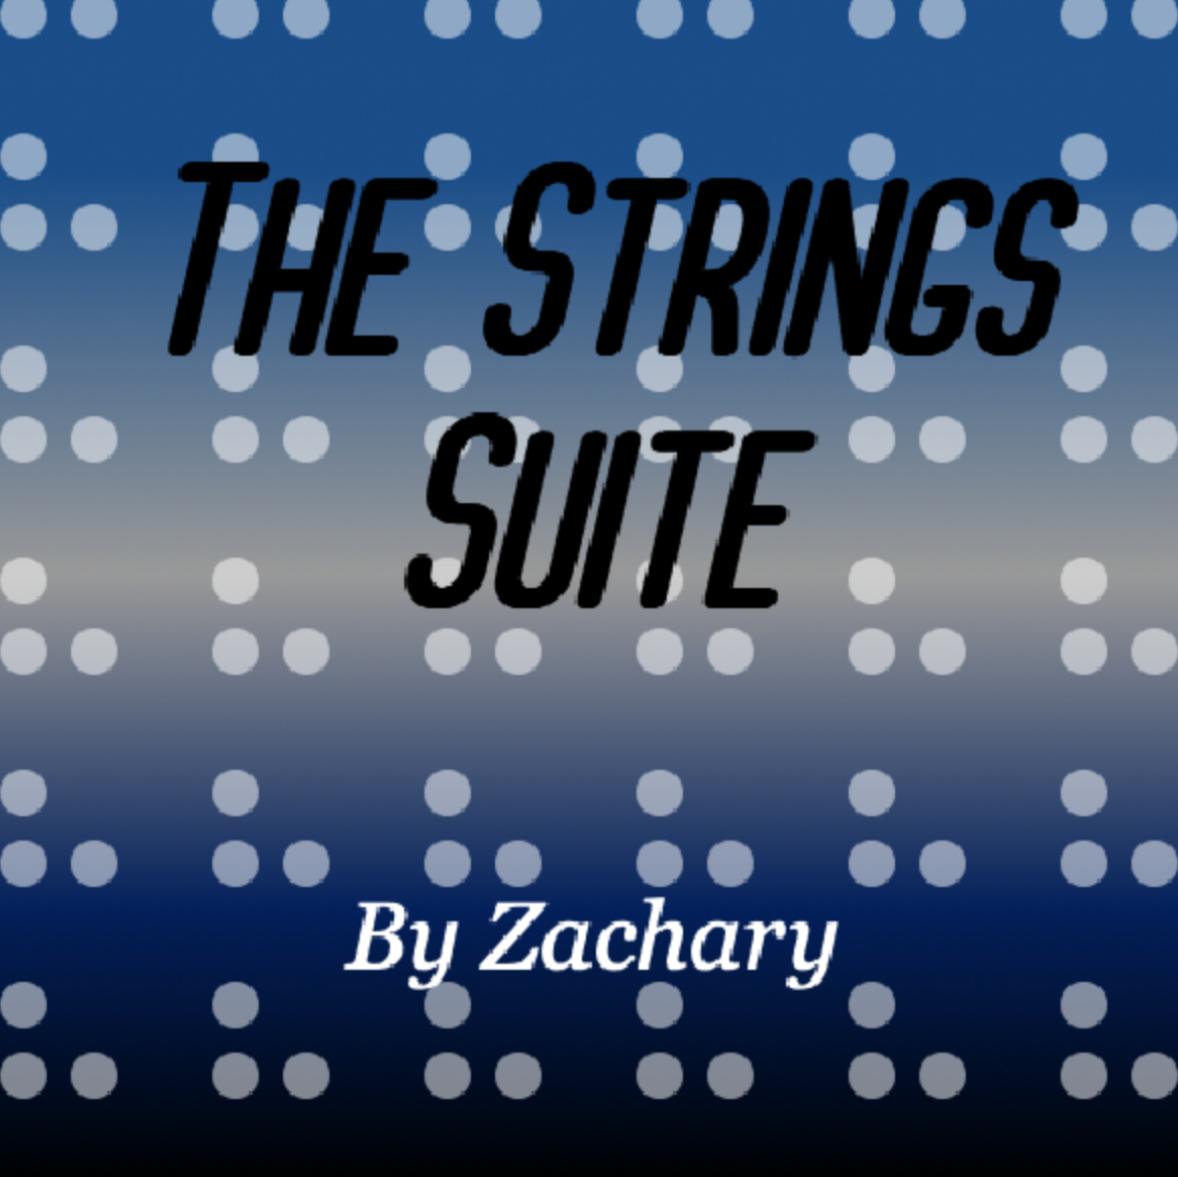 The Strings Suite